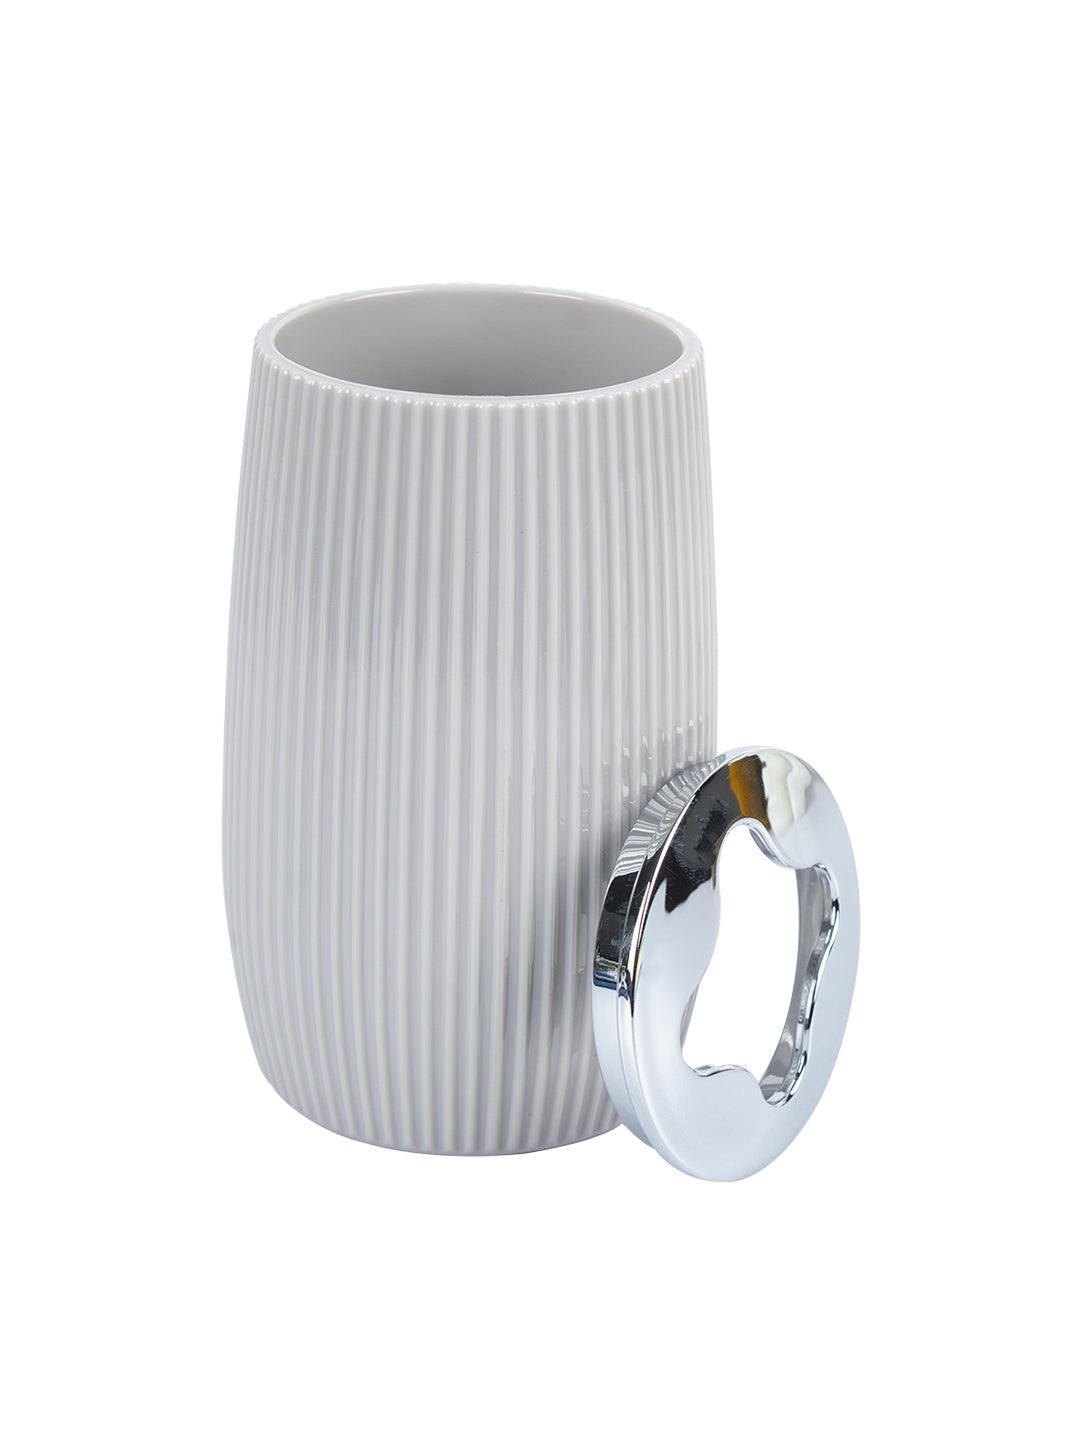 Market99 Toothbrush Holder With Striped Cylindrical Toothbrush Holder Tumbler Online - MARKET 99